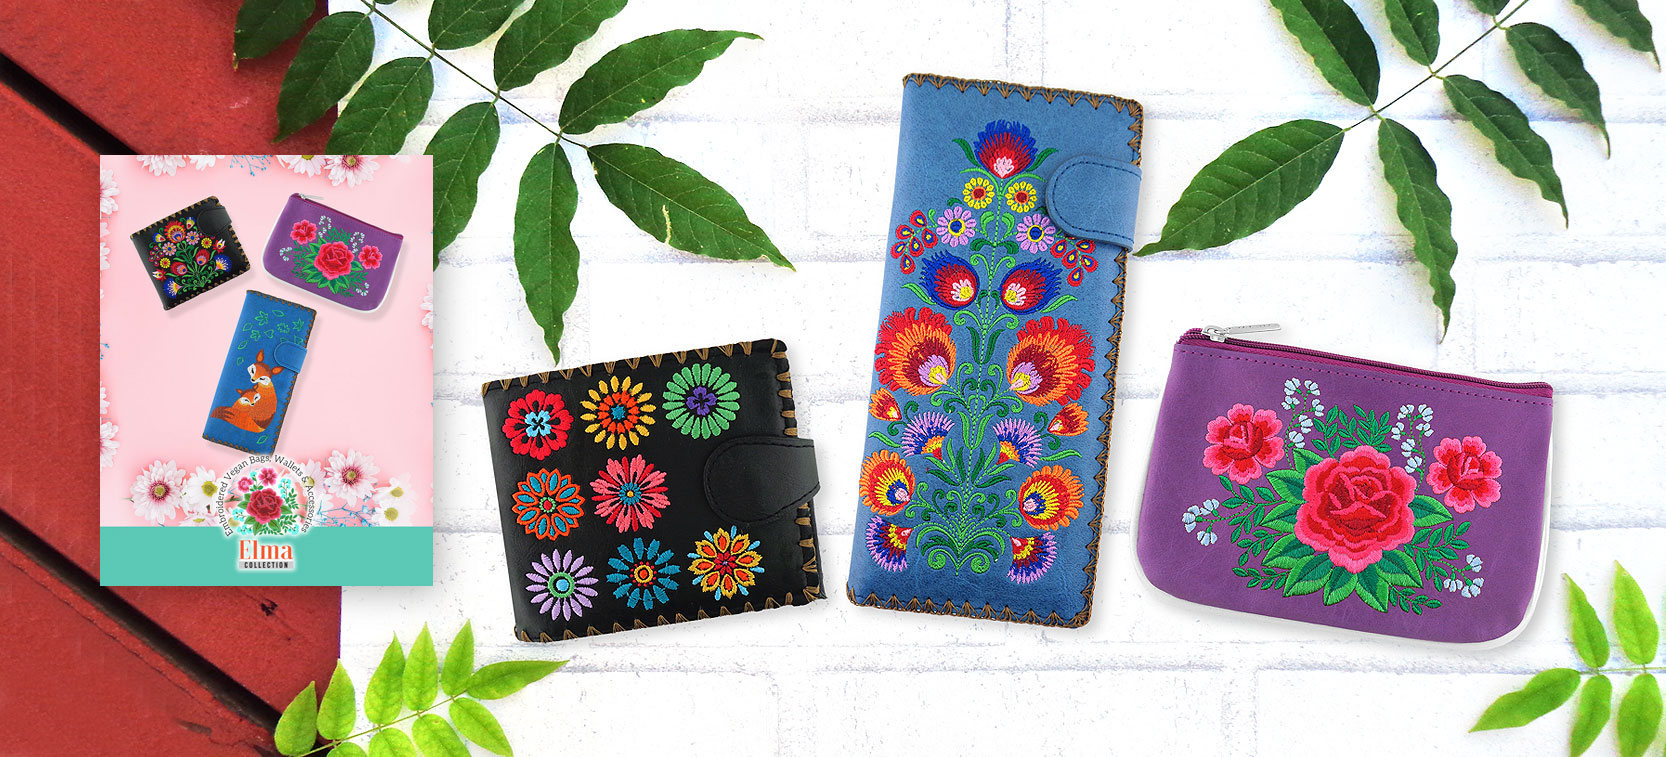 LAVISHY design and wholesale vegan bags, wallets, travel & tech accessories with beautiful embroidery to gift shops, boutiques and book stores in Canada, USA and worldwide.